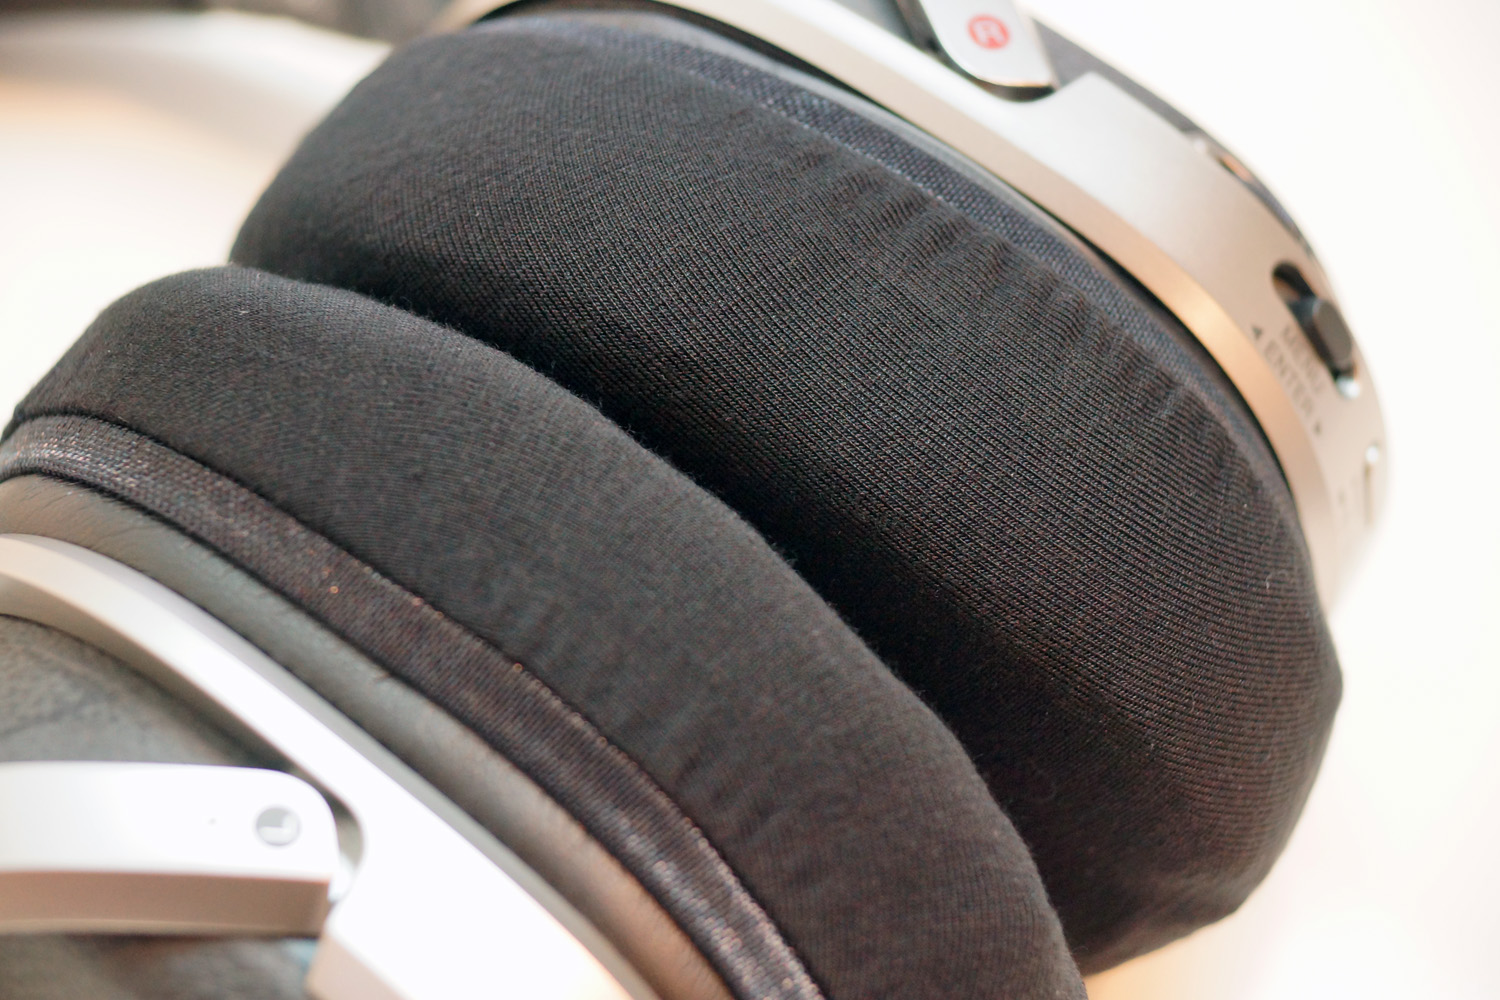 SONY MDR-HW700 earpad repair and protection: Super Stretch